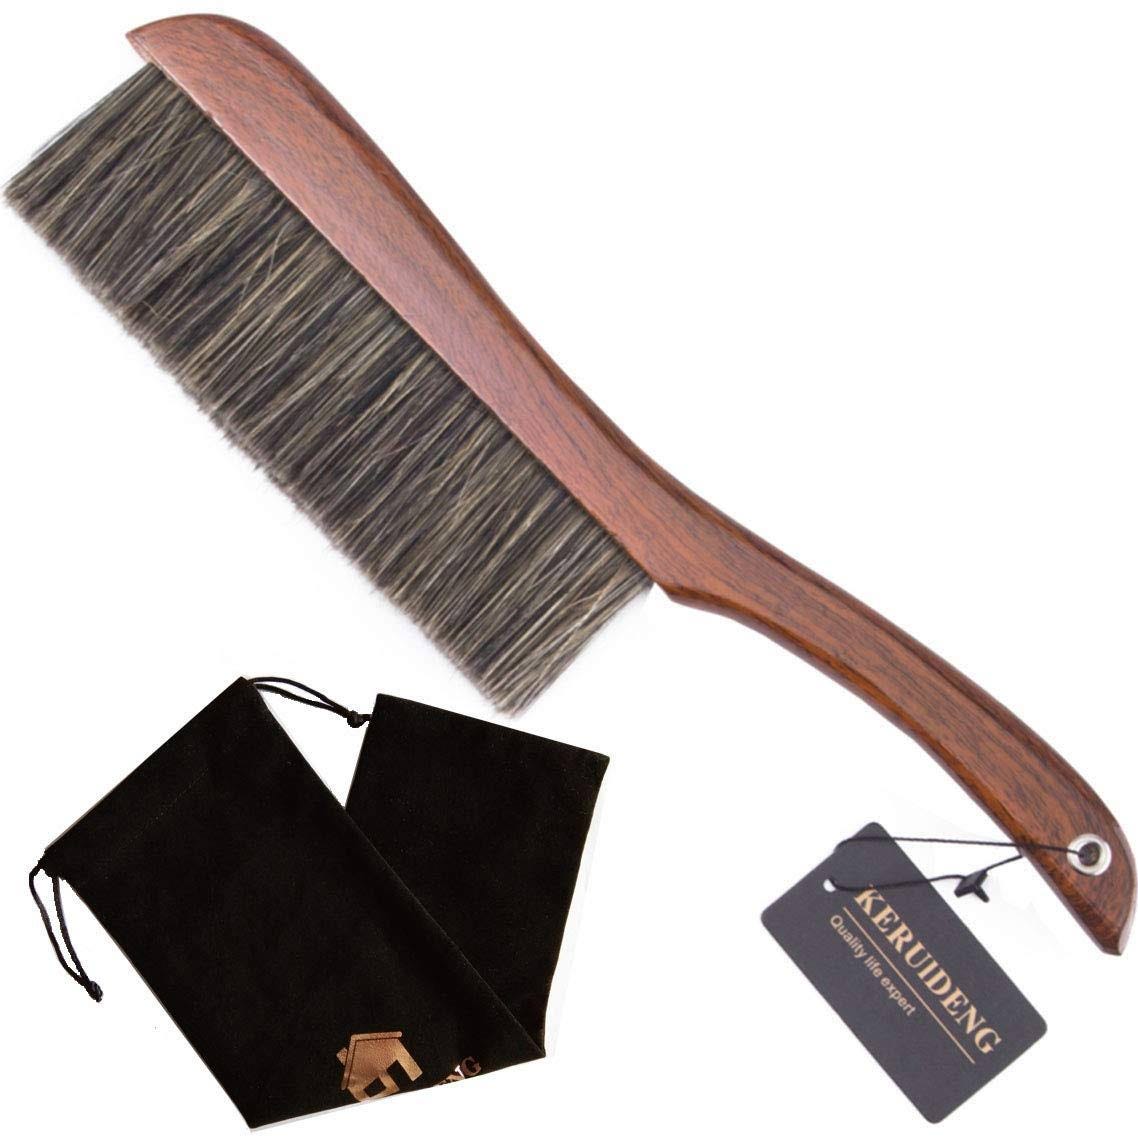 Comfortable Soft Duster Brush - Natural Wood Handle for Home Cleaning | Image